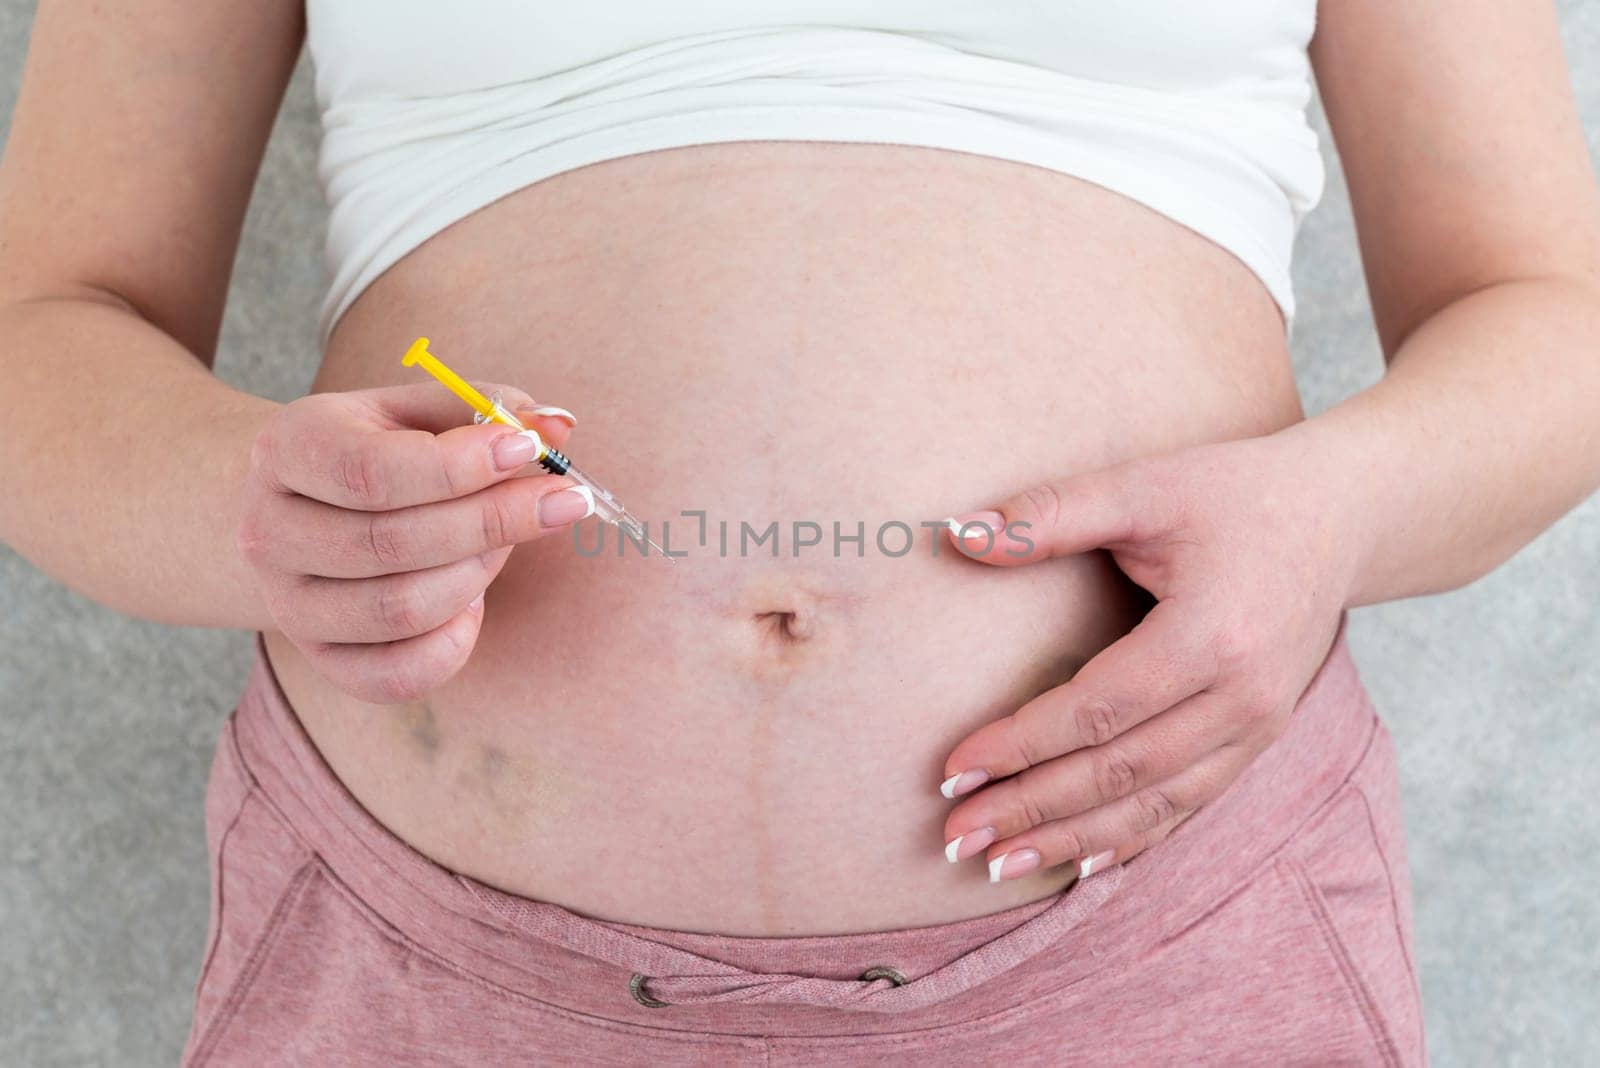 Pregnant woman making injection in stomach by Mariakray